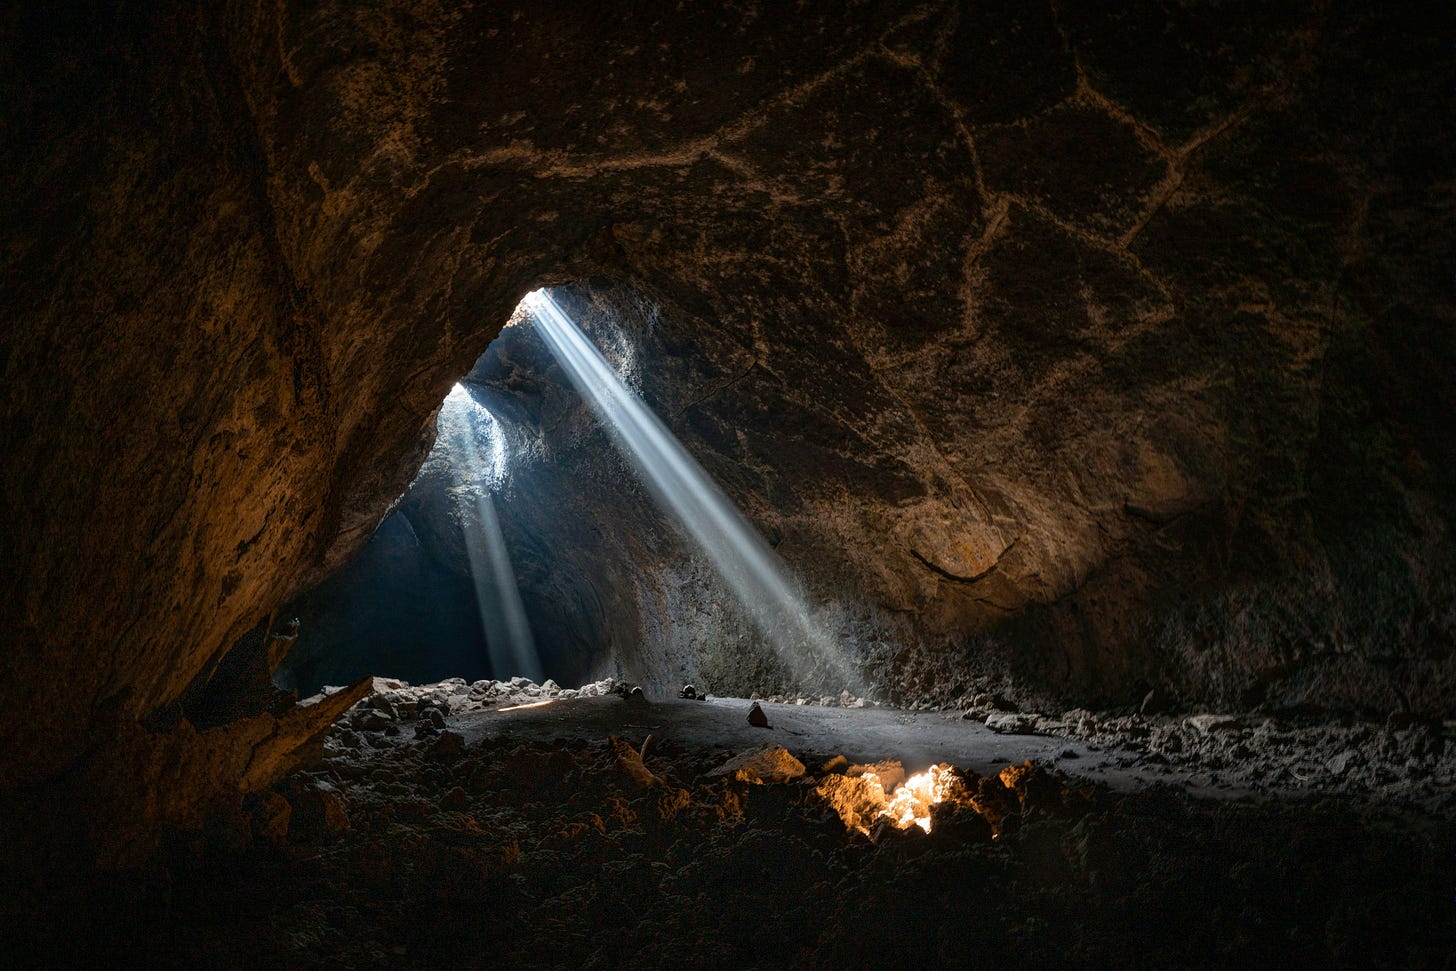 Photo from inside a cave. Walls are brown and floor is dark. There are 2 holes in the middle of the photo where light shines in as 2 independent beams. One shines on the ground and illuminates the rocks in a bright yellow glow.